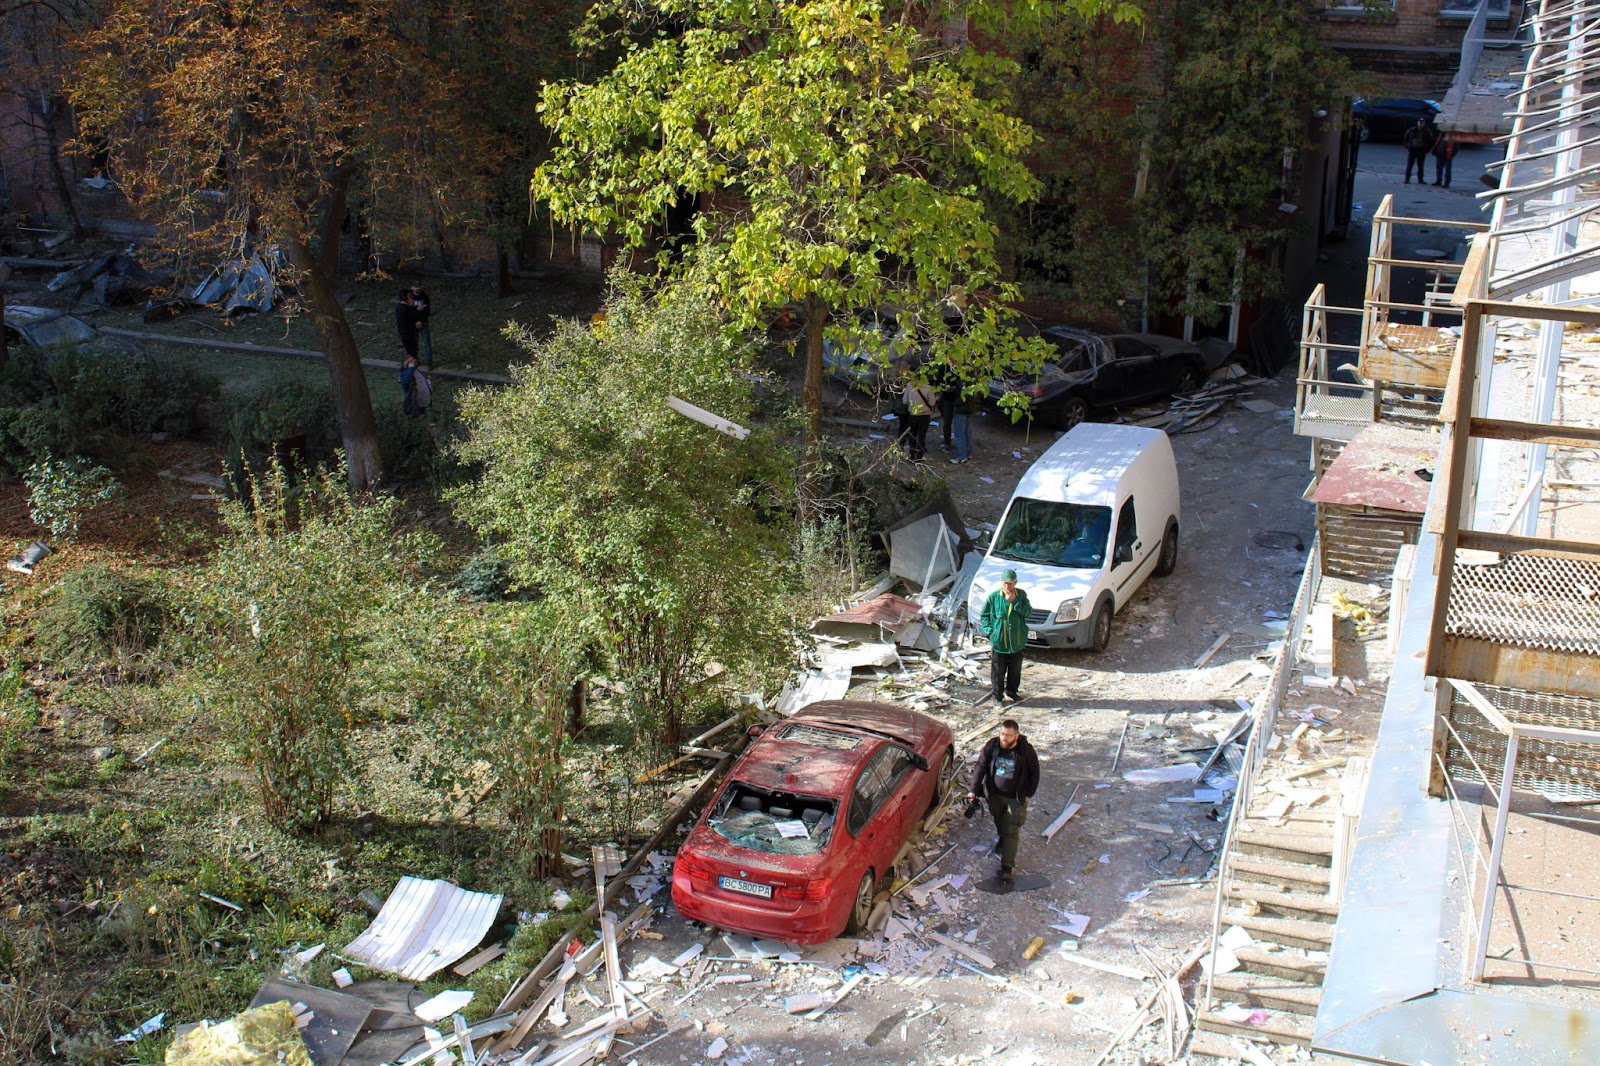 The yard of the house with damaged cars